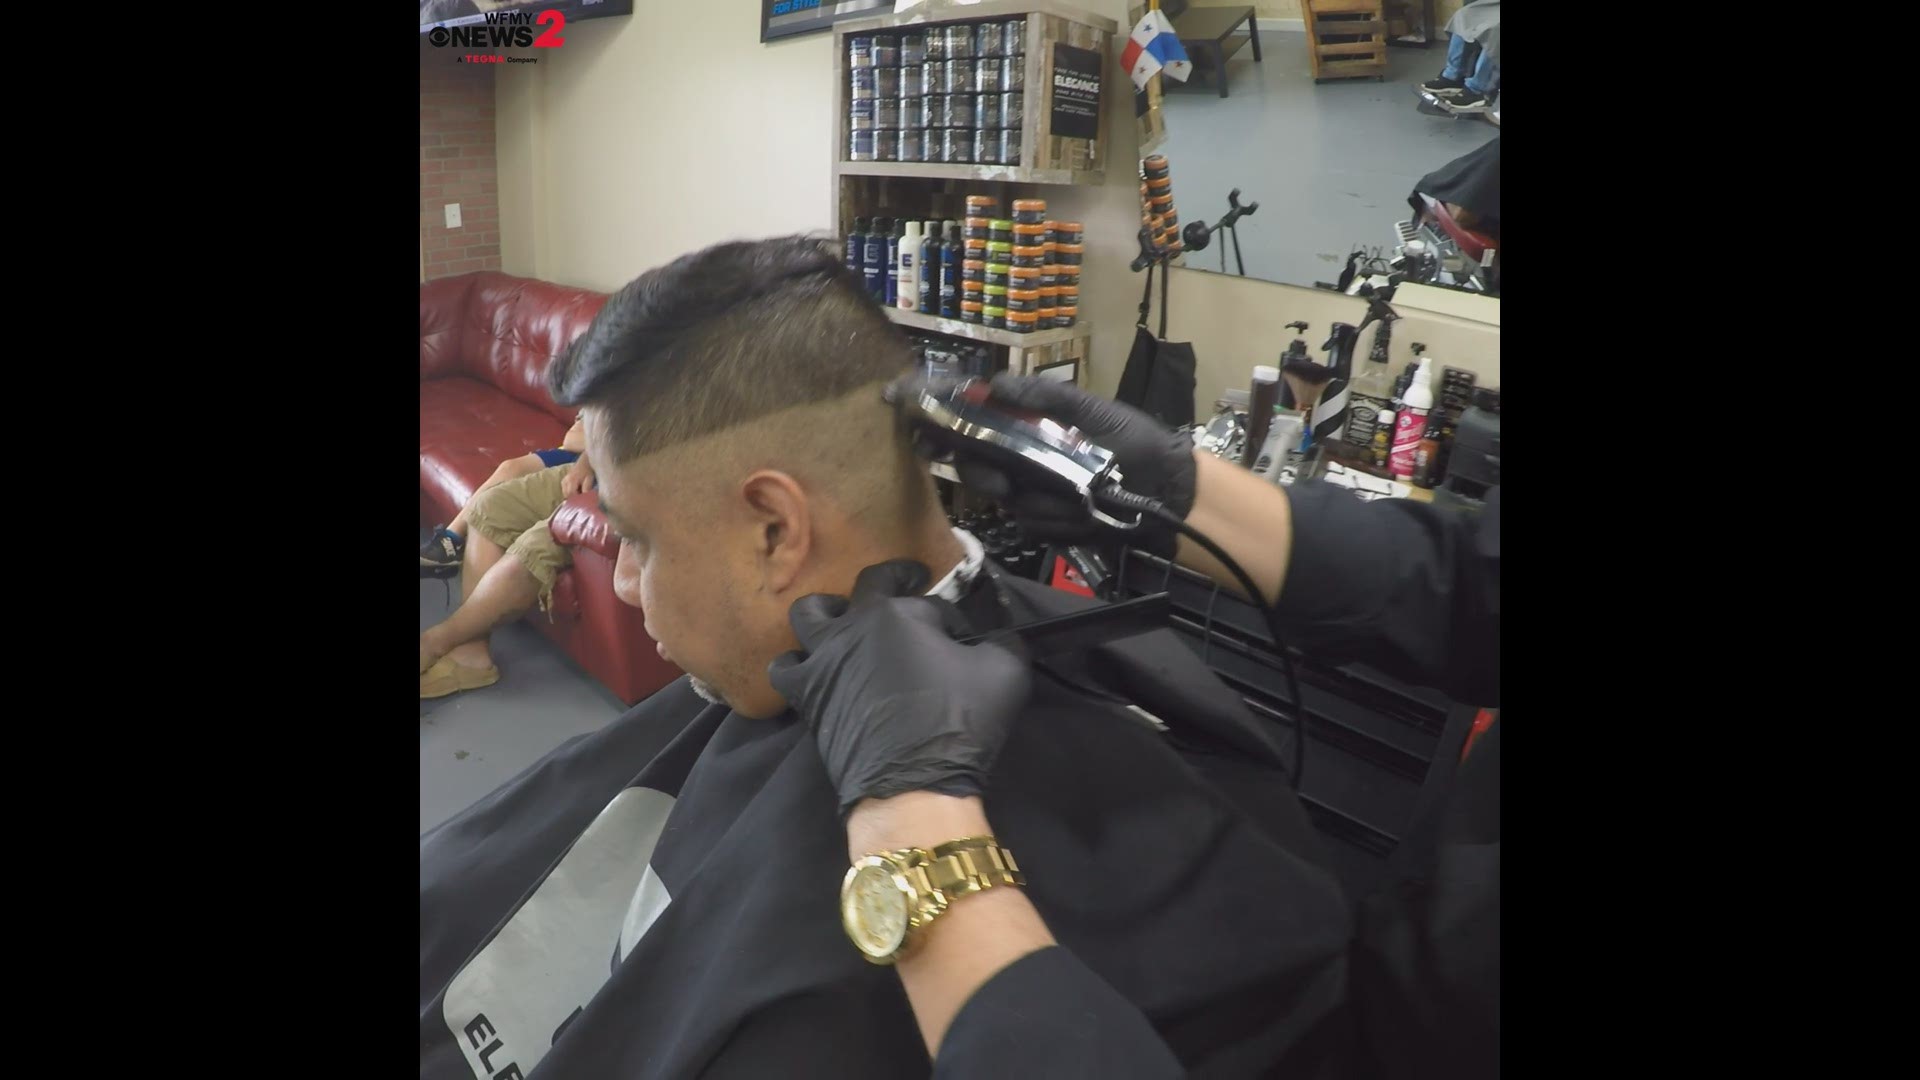 Blast Barber Studio/Barber�a has become a popular spot for locals to get their haircuts and shaves... And brews.